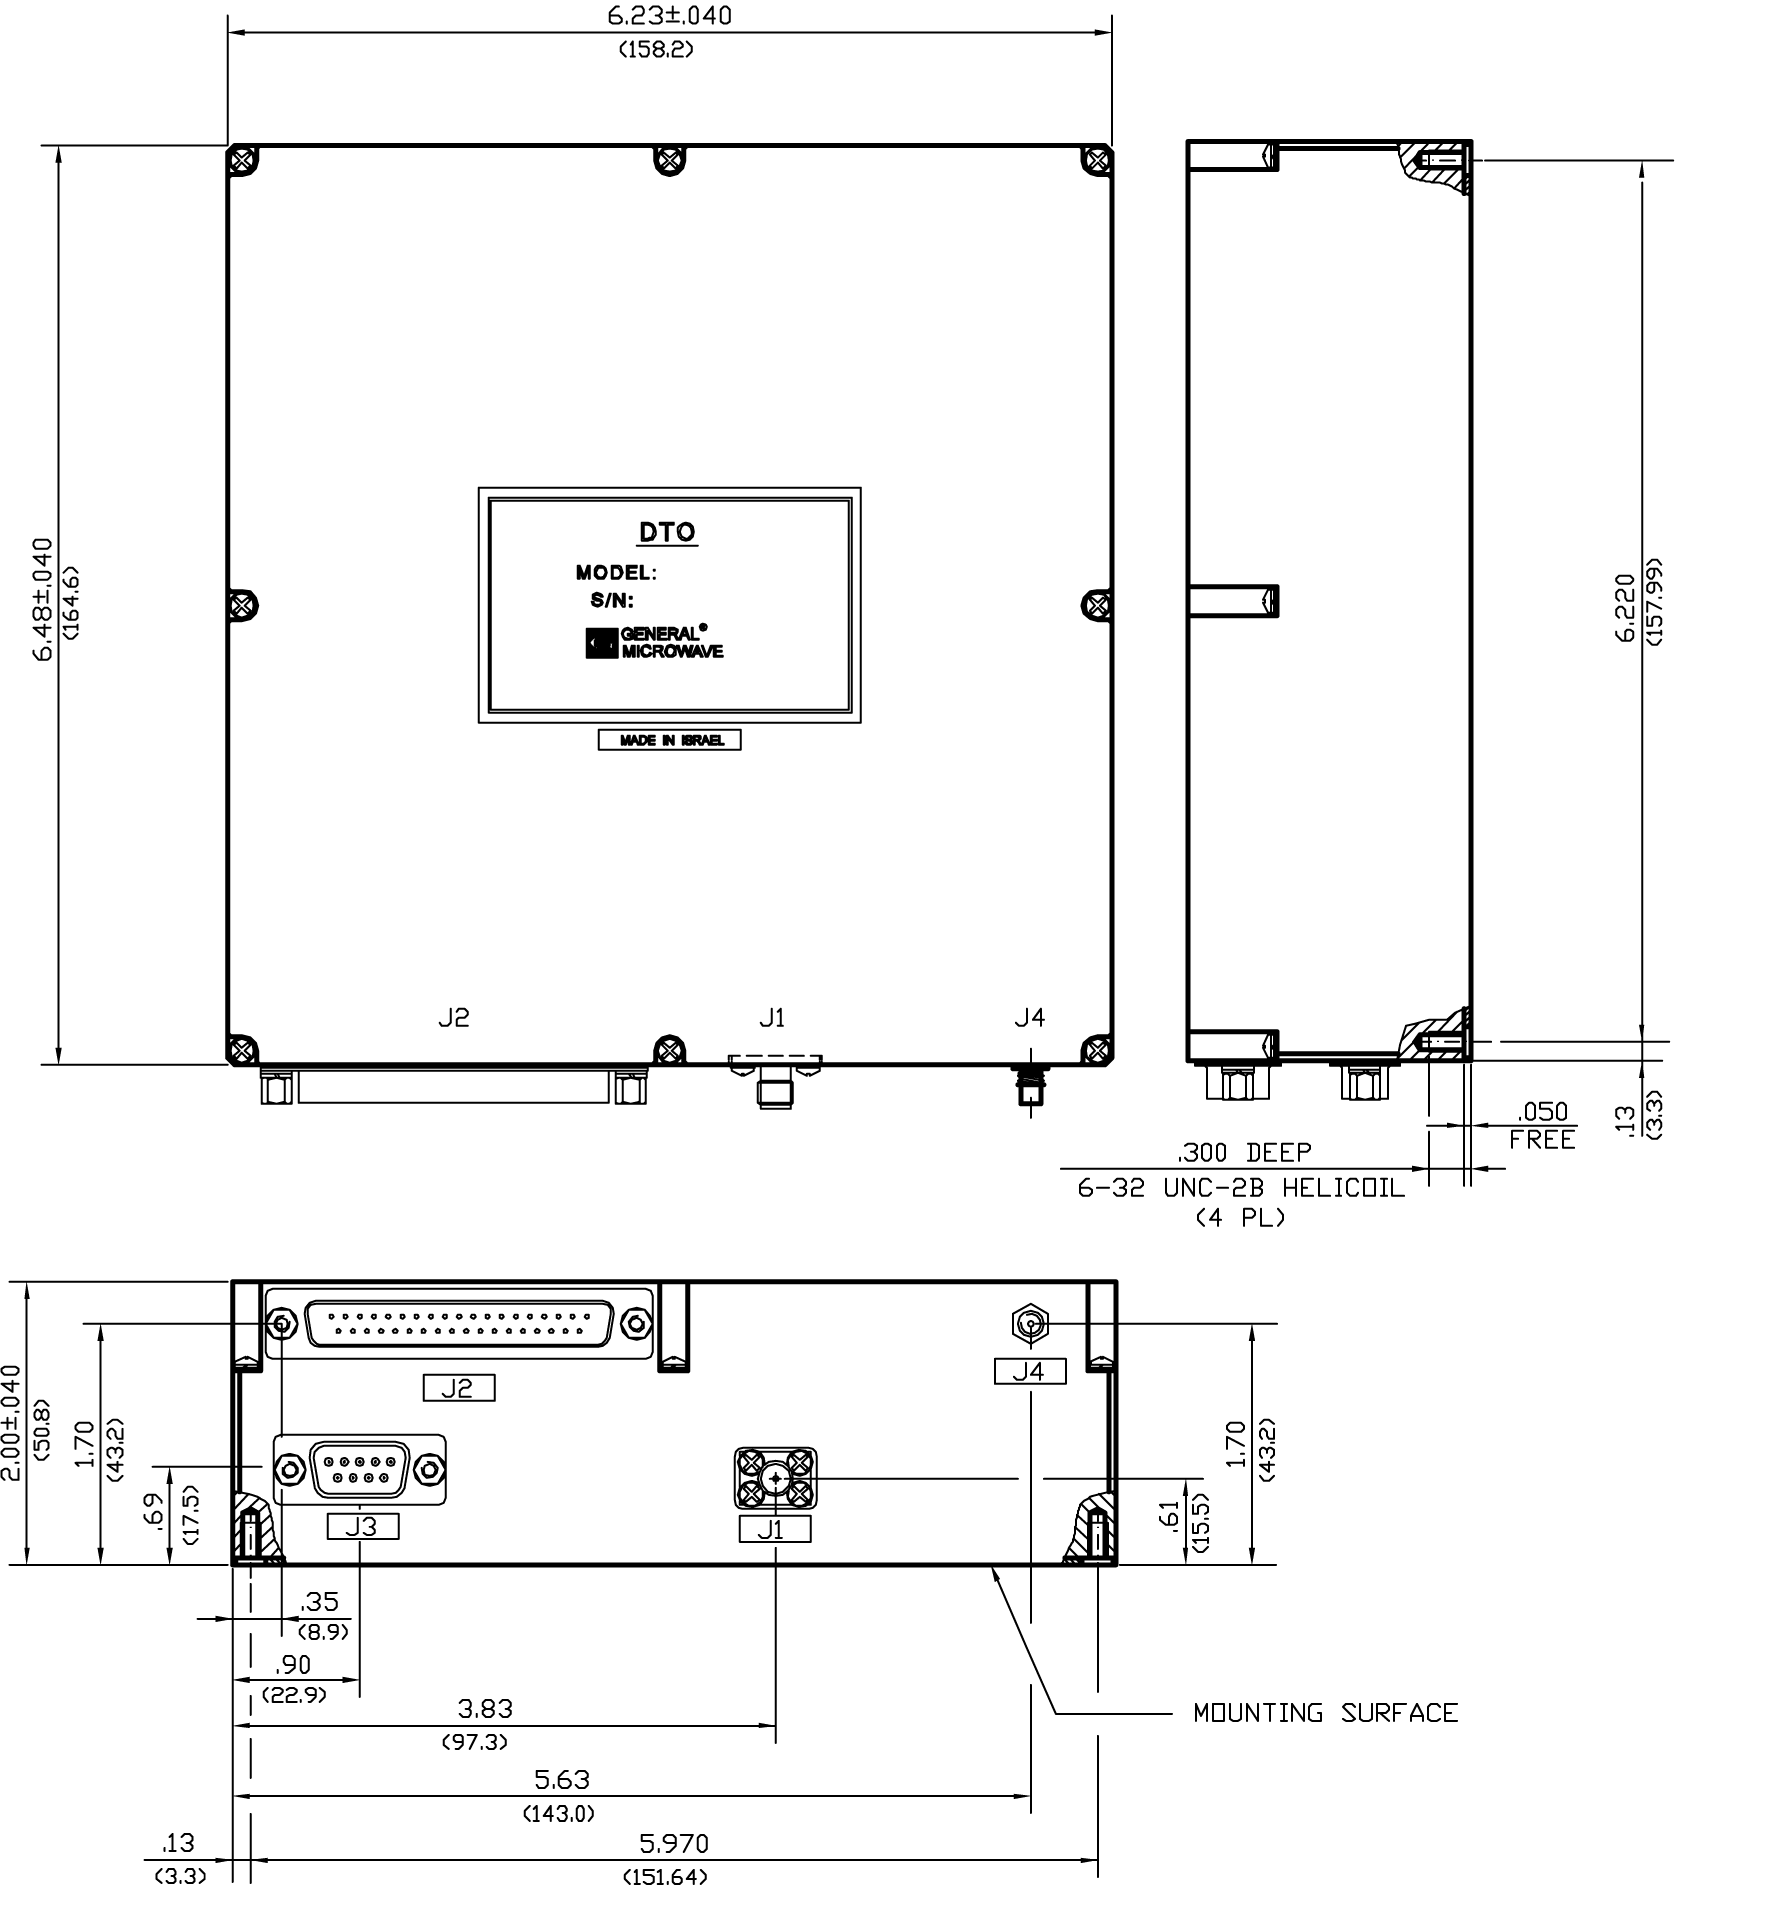 Dimensions and weights for DTO Models D6206, D6218, D6618